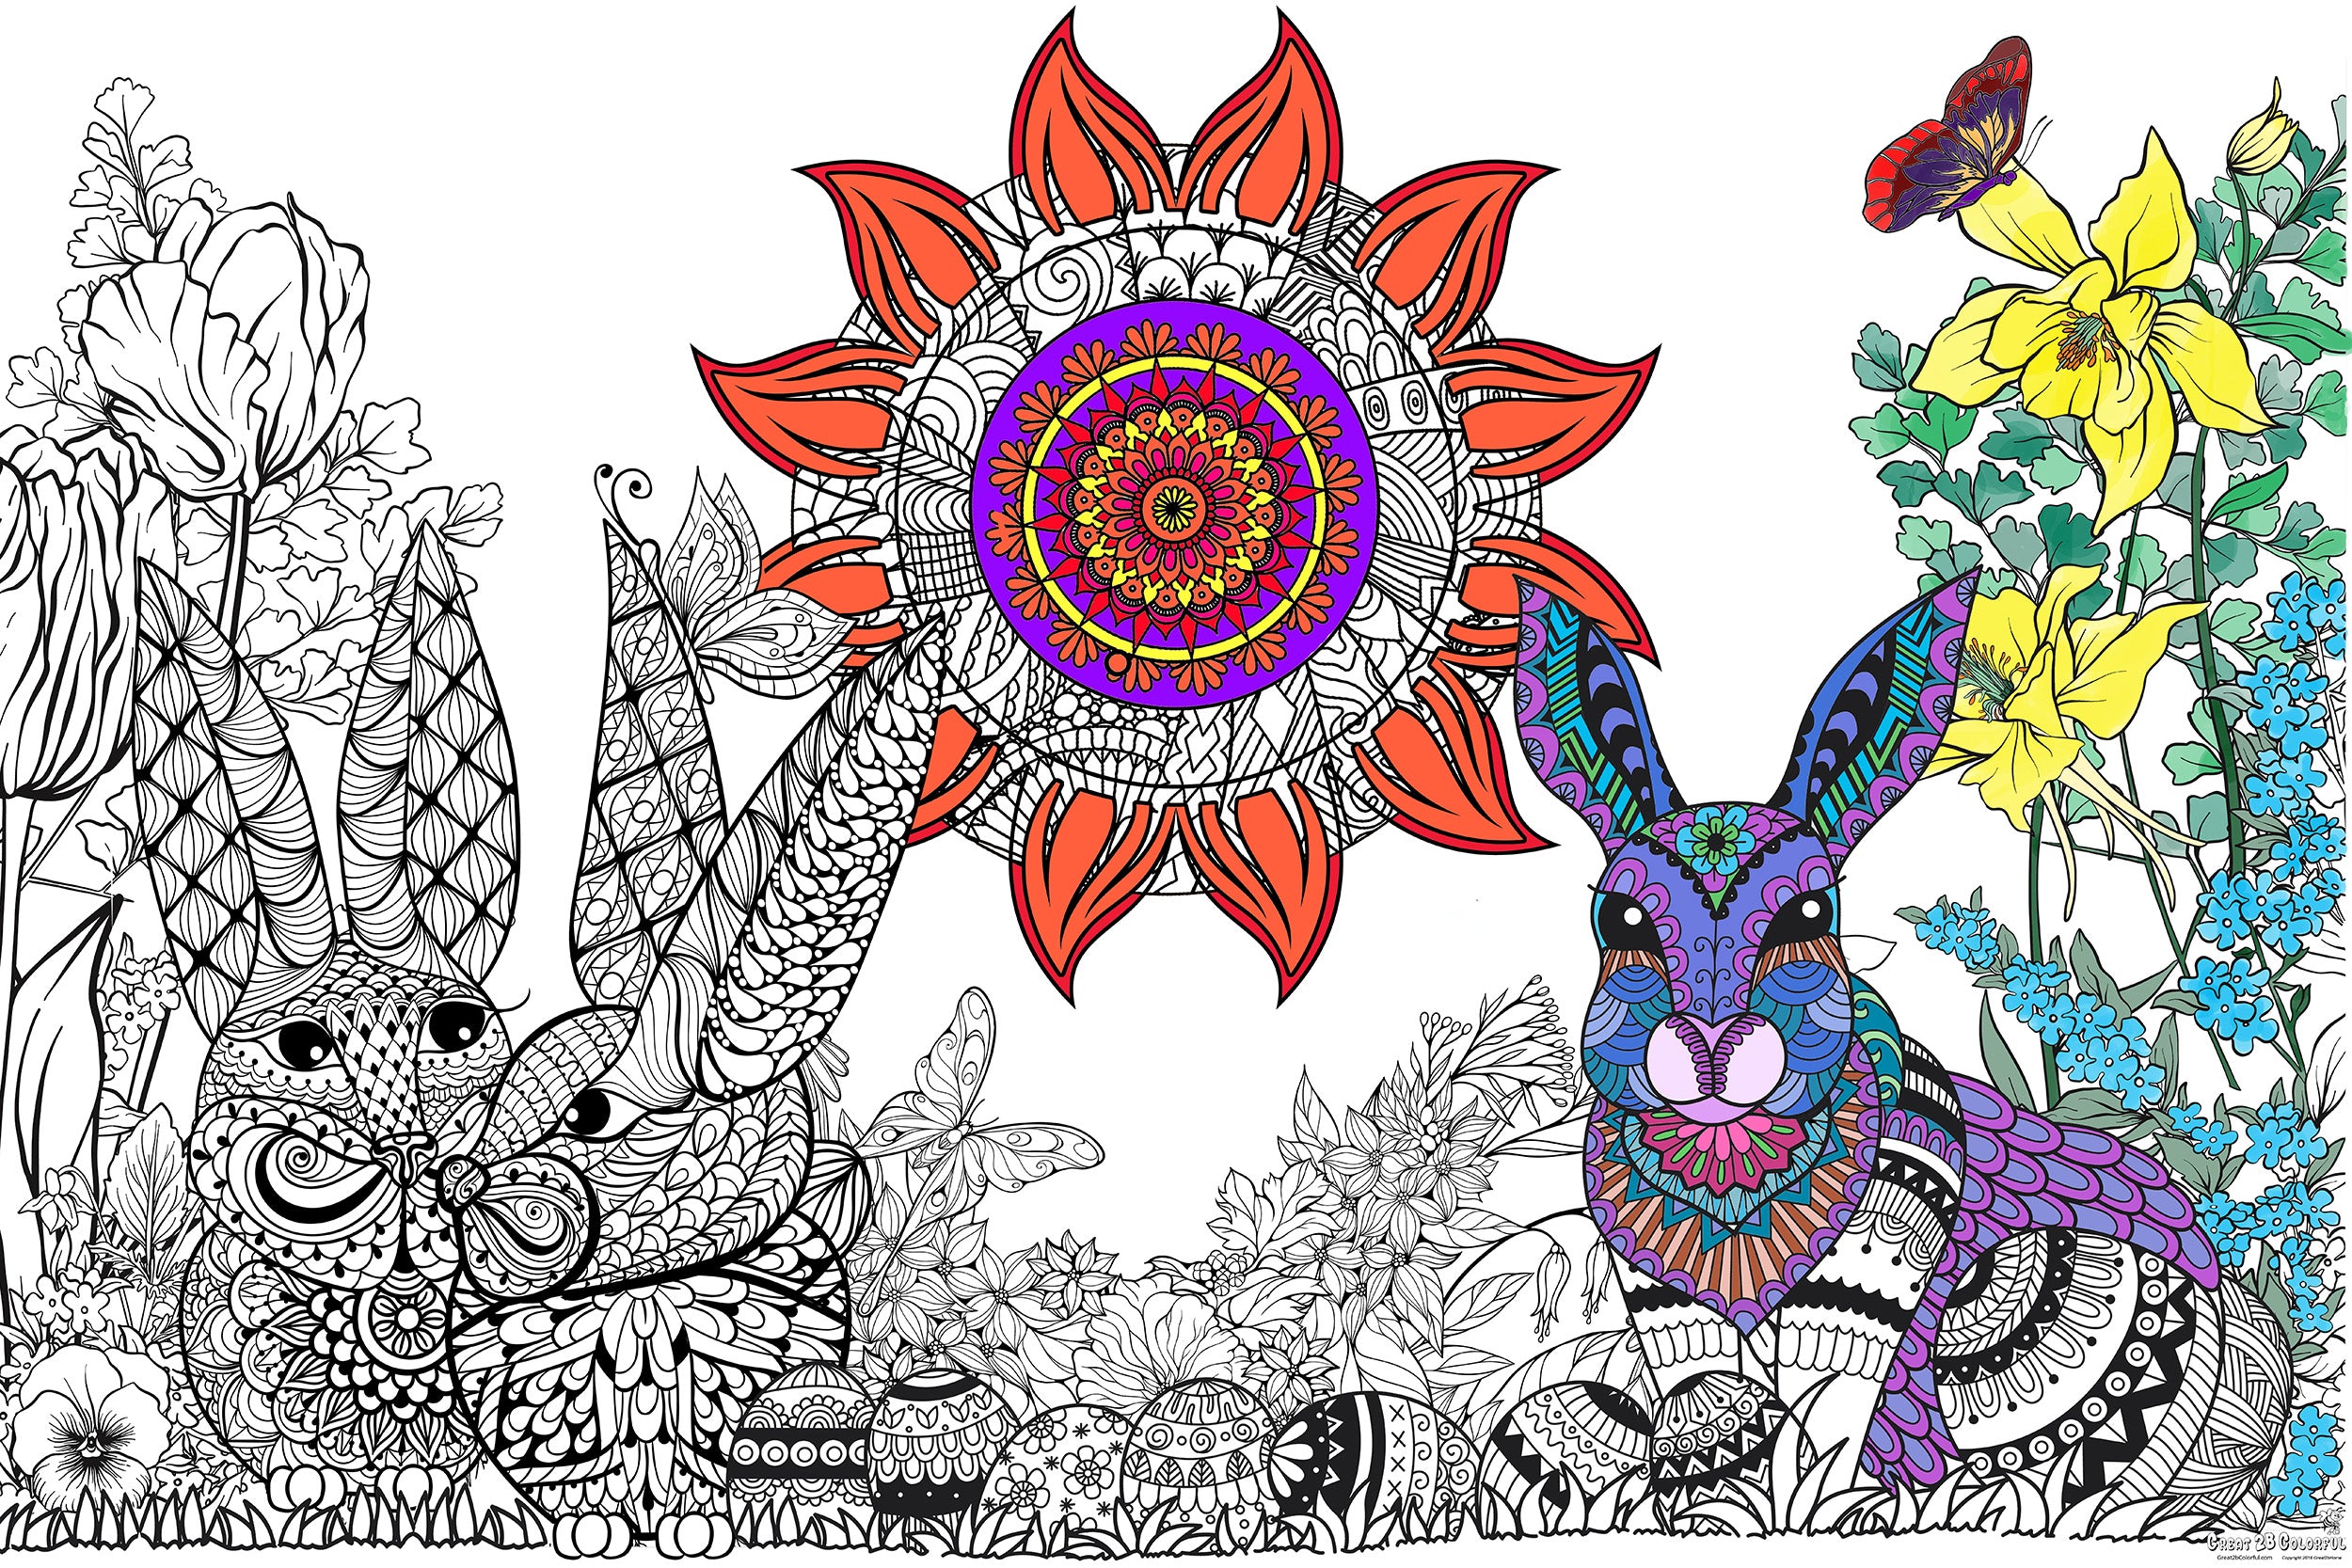 Great2bColorful - 24" x 16" Happy Easter, 4-Pack Coloring Posters